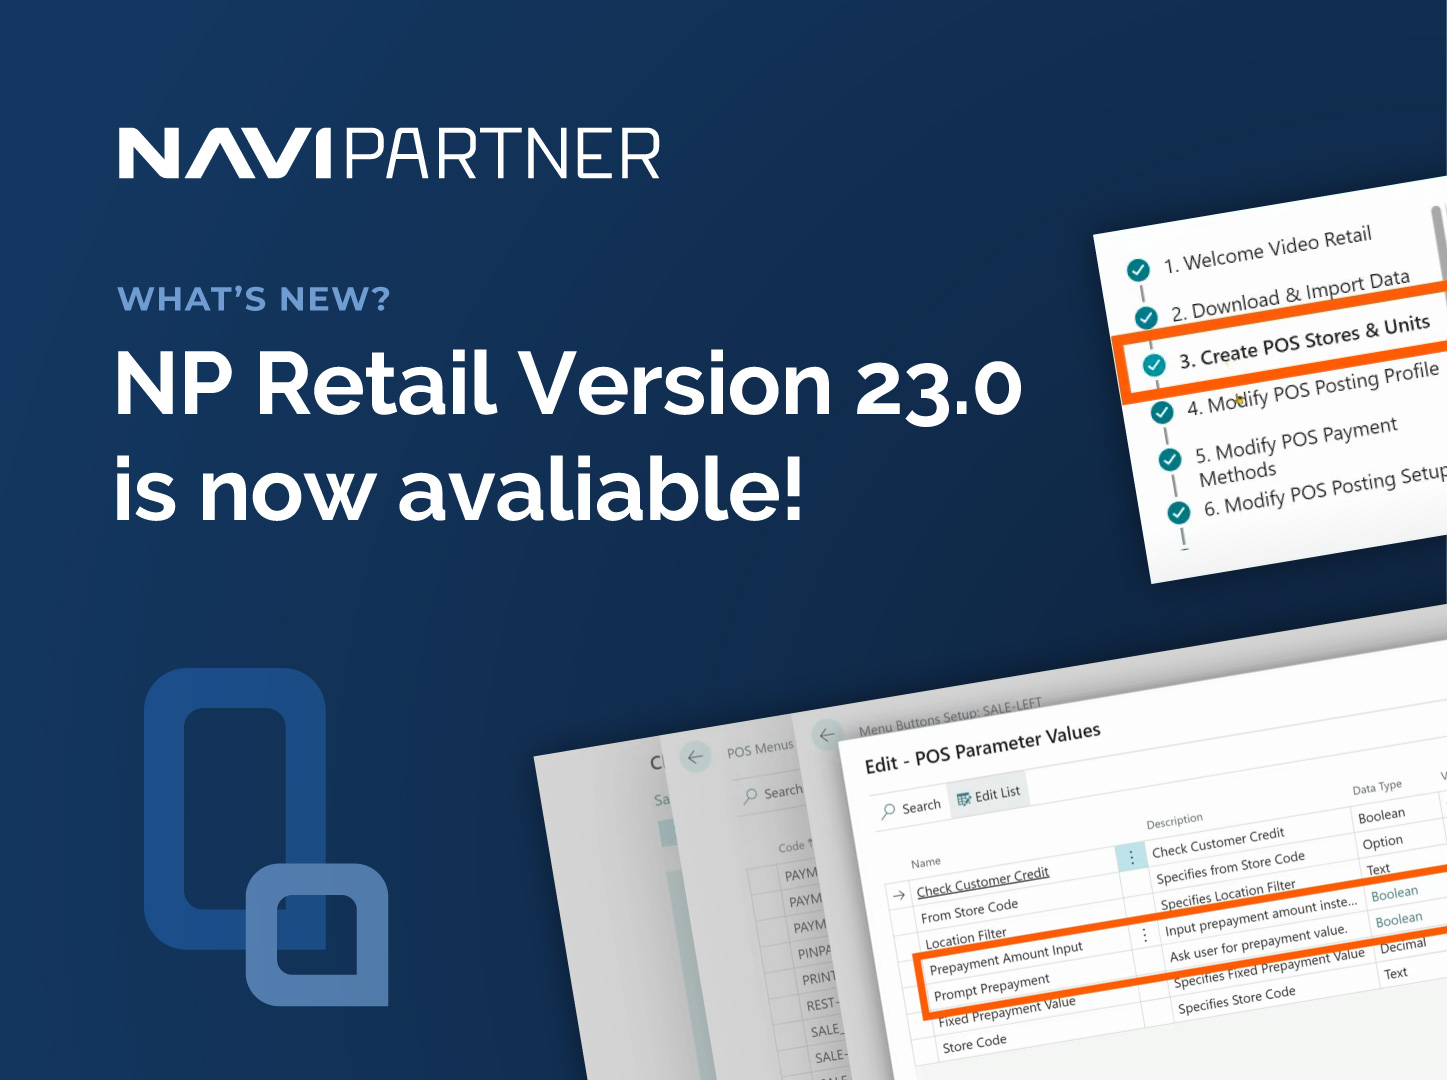 NP Retail Version 23.0: All you need to know about the latest version of our NP Retail solution!